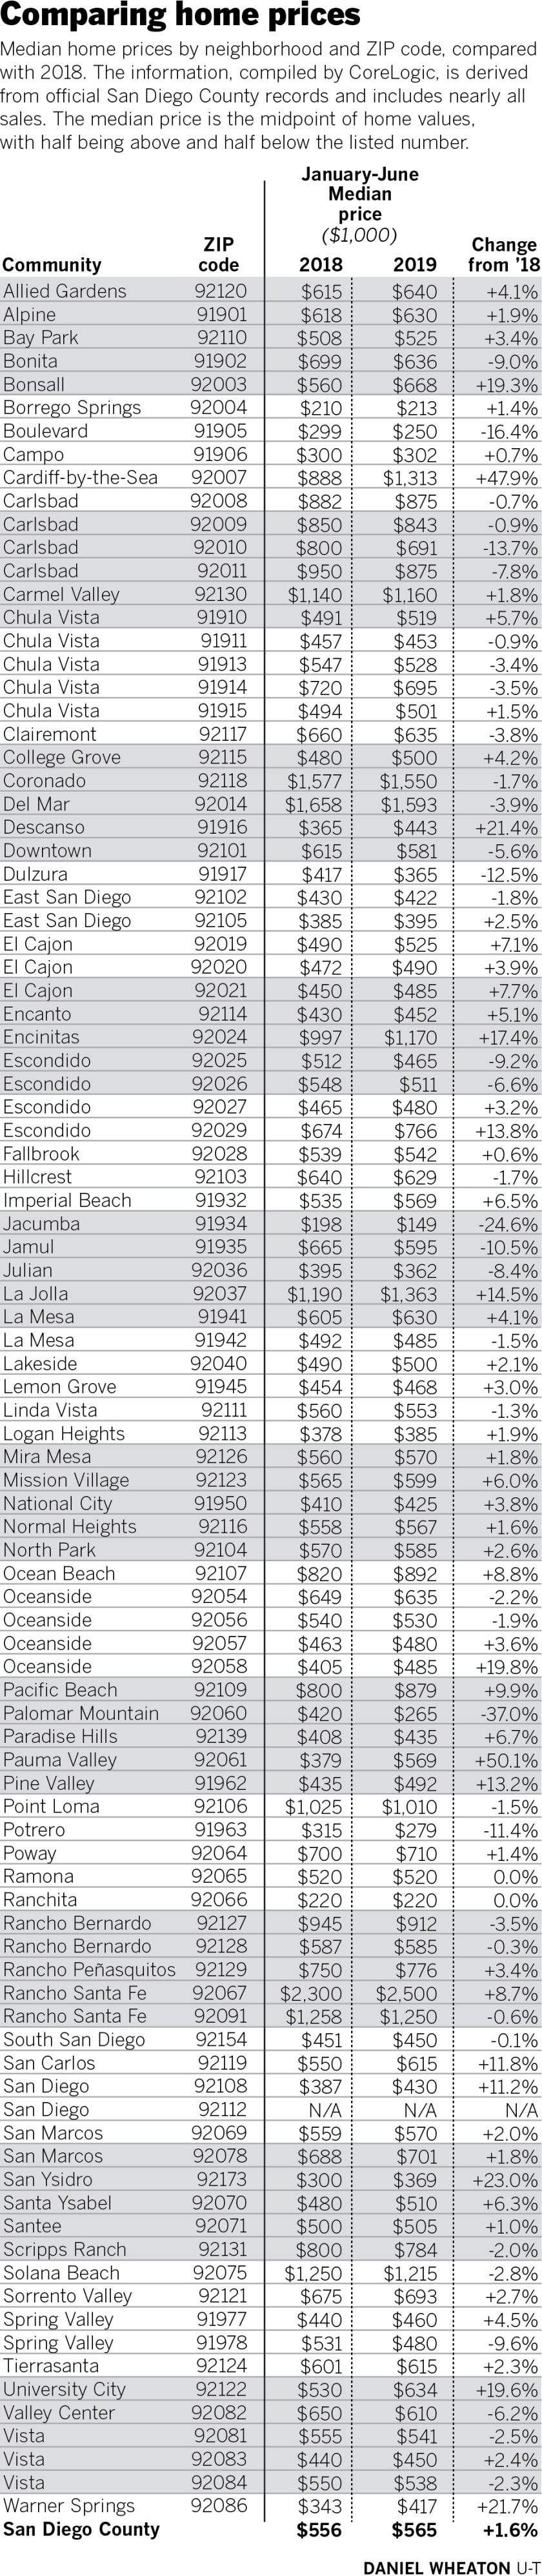 Chart shows the median home price by ZIP code in San Diego County, comparing January to June of 2018 to 2019. 